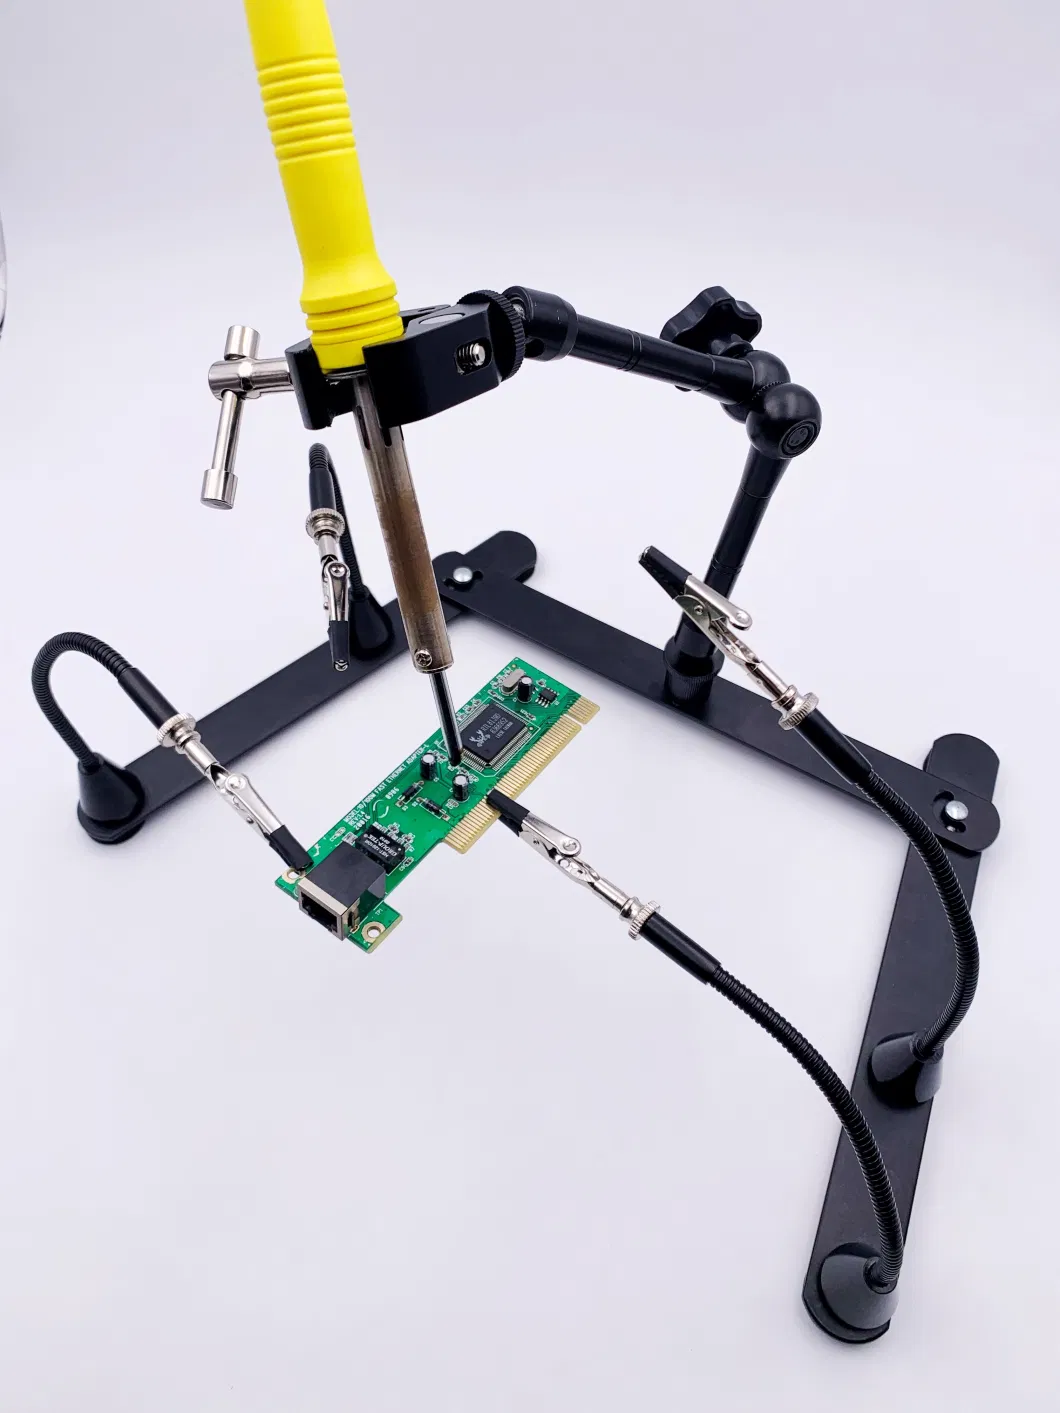 Helping Hands Professional Soldering Station with Clamp for PCB Welding Repair Tool